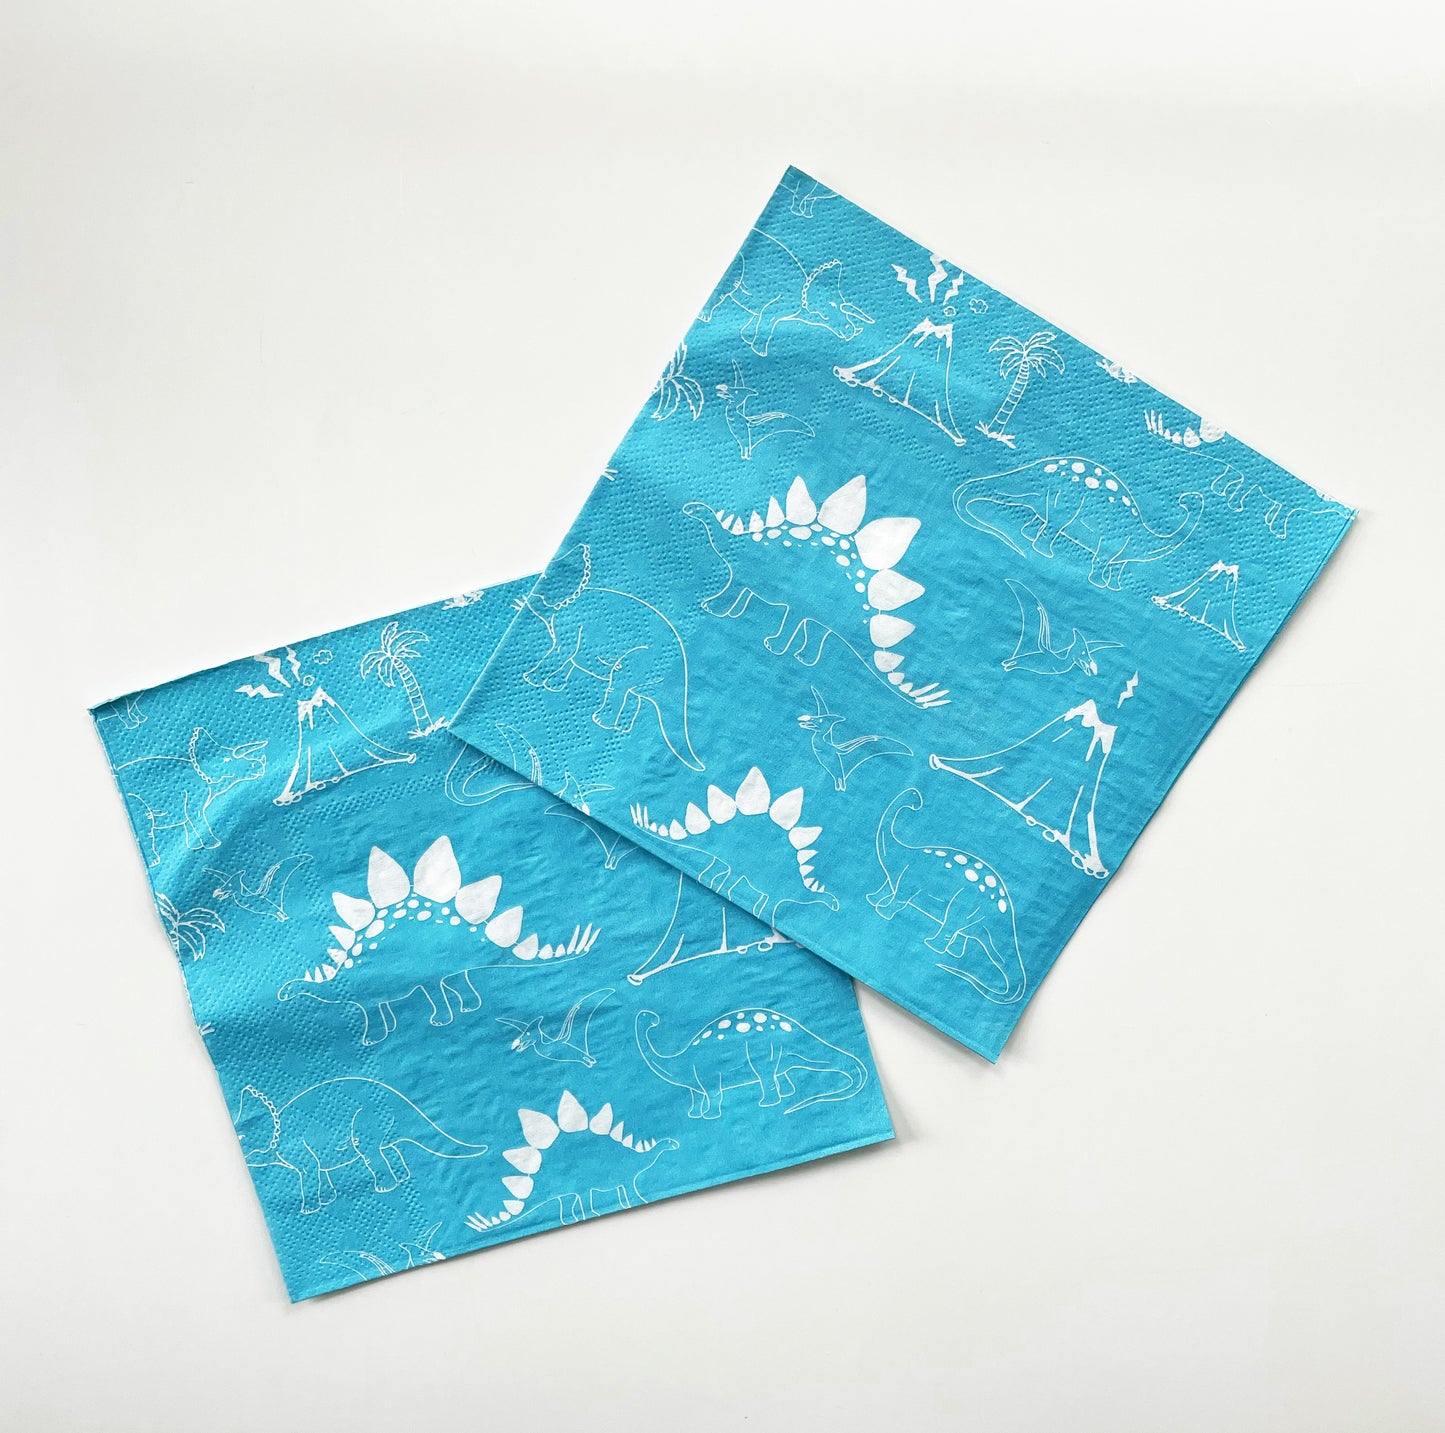 Blue and white paper party napkins. The dinosaur pattern features green, blue, yellow and red dinosaurs, volcanoes and palm trees